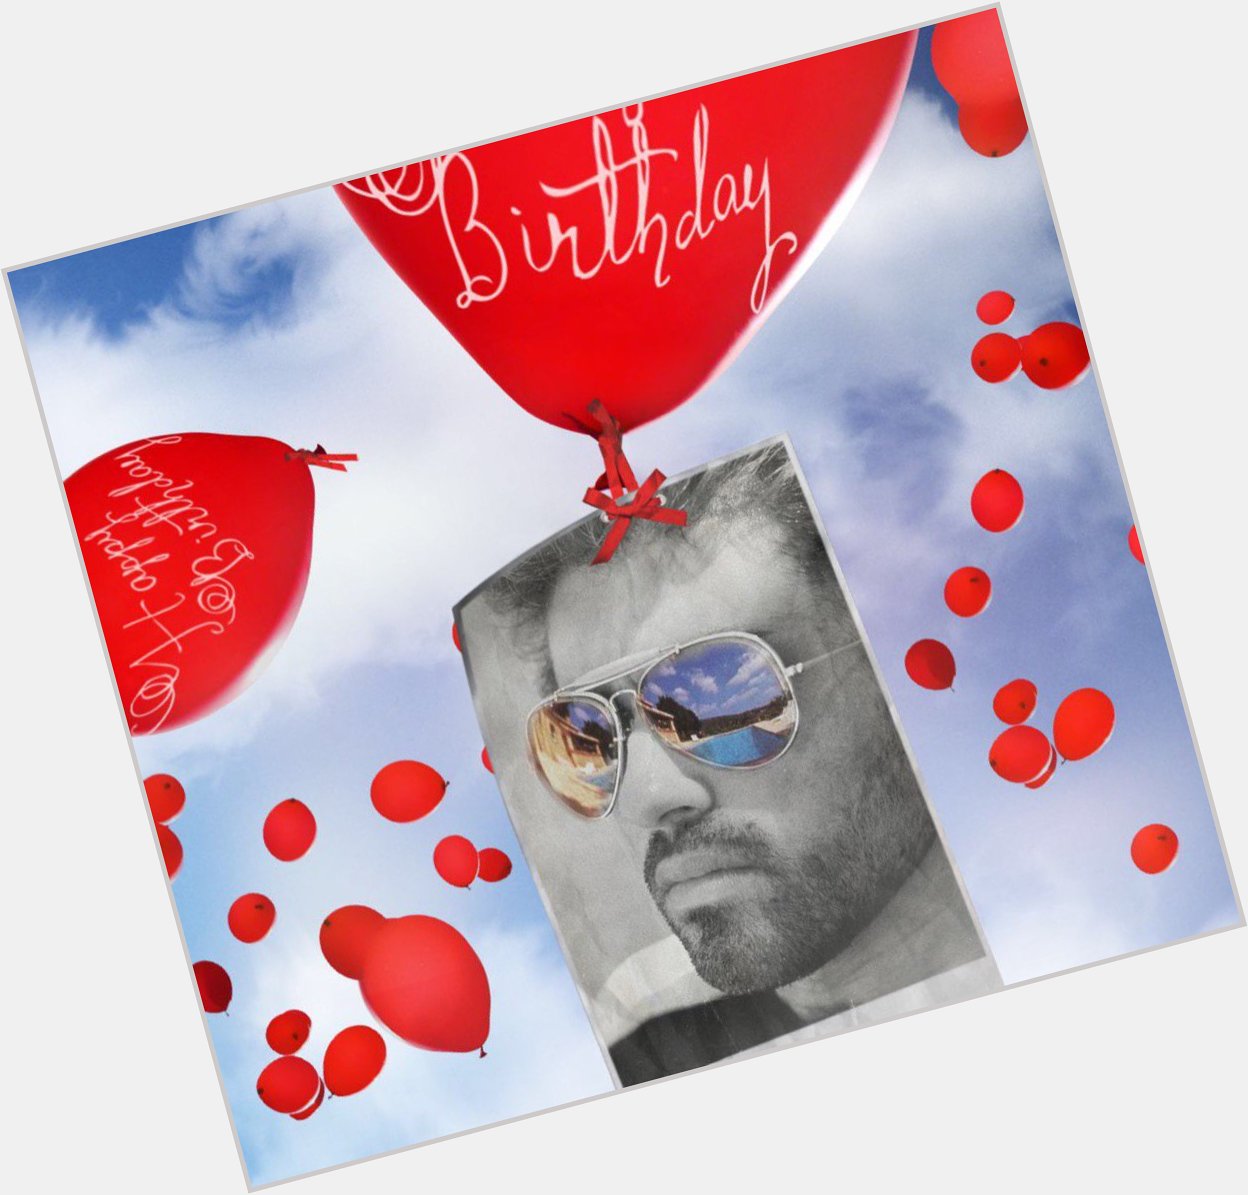 Happy Heavenly Birthday George Michael!  Thinking of you till the end of time   